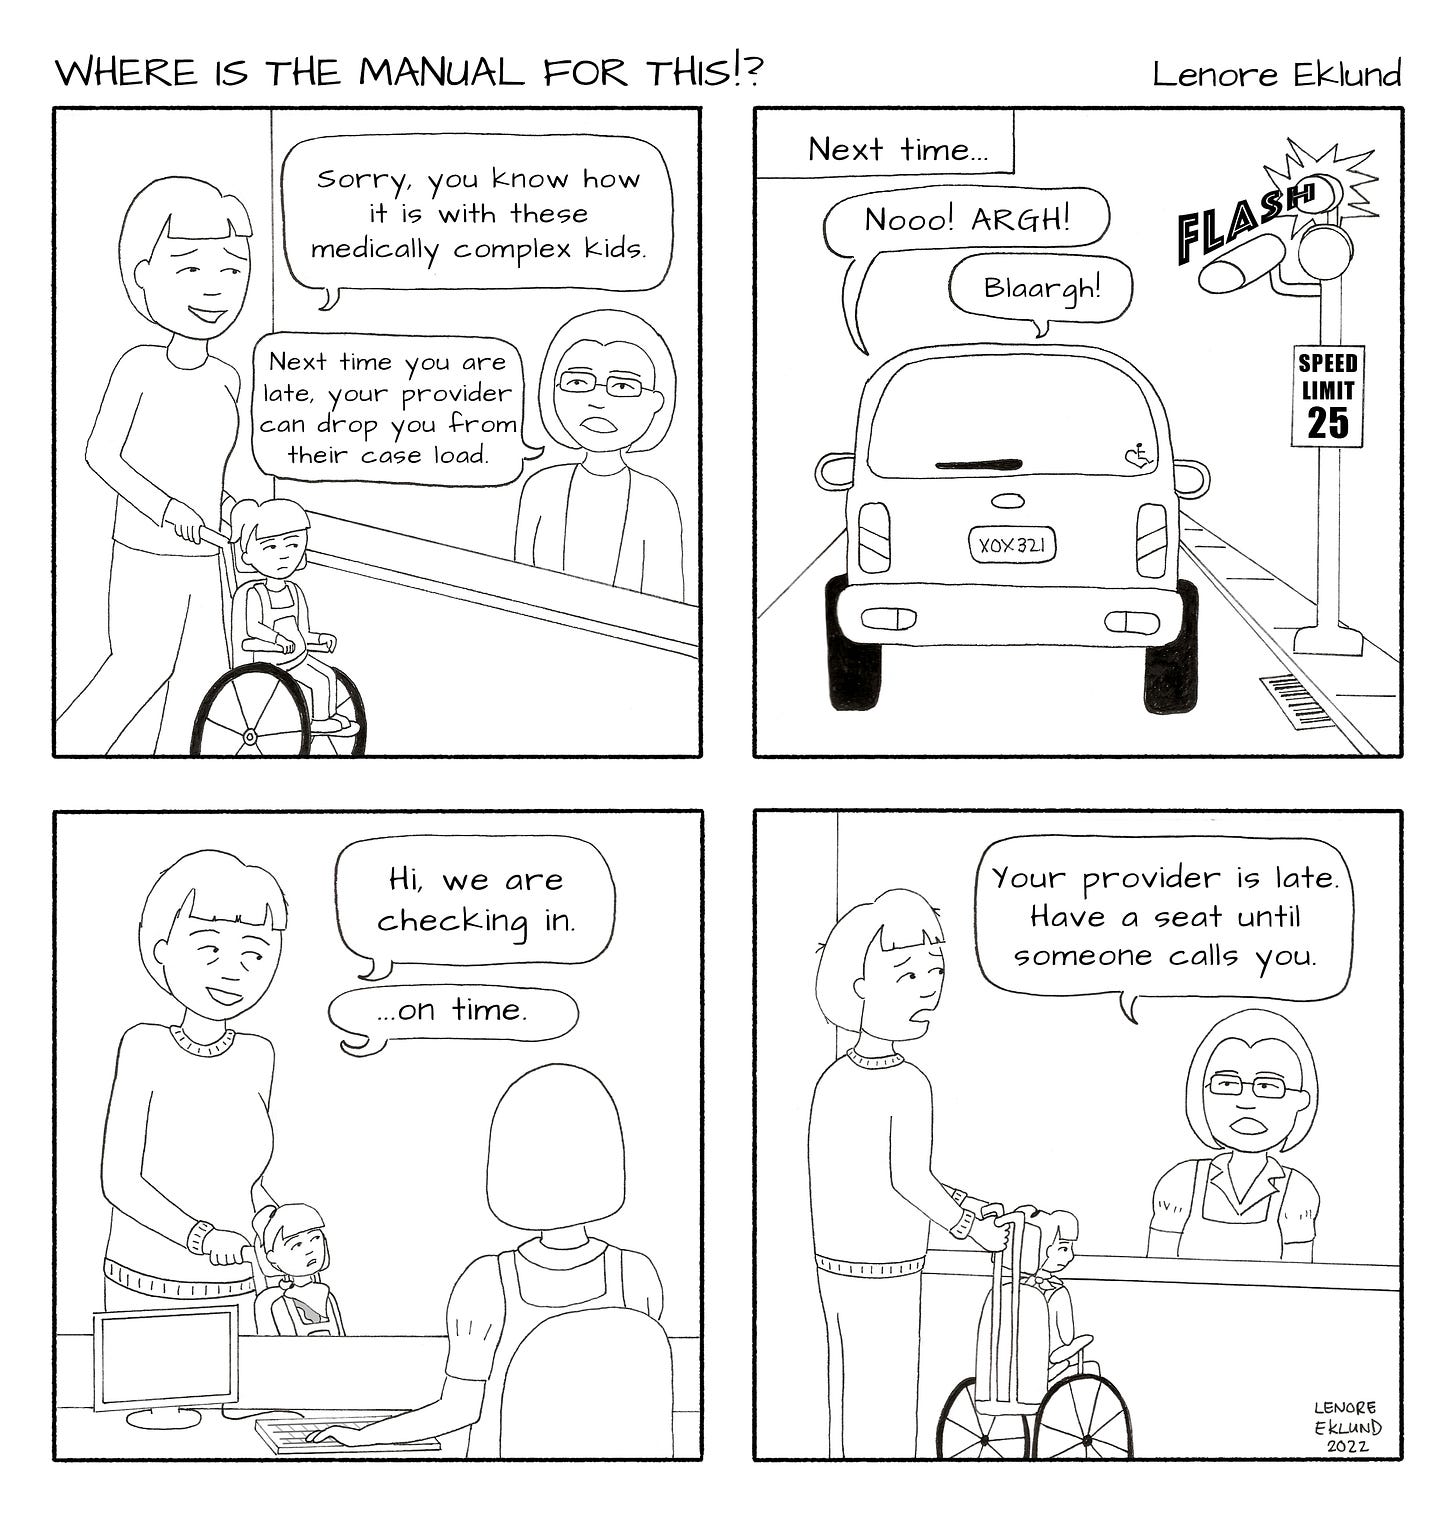 A four-panel cartoon in black and white line drawings. The first panel is a mother arriving with her daughter to a woman behind a desk. The mother’s speech bubble reads: “Sorry, you know how it is with these medically complex kids.” The woman answers: “Next time you are late, your provider can drop you from their case load.” The second panel reads “Next time” above a car speeding past a 25 mph speed limit sign as a flash signals they just got a ticket. Speech bubbles from the car read: “Nooo! ARGH! Blaargh!” The third panel is a harried mom pushing her daughter in a wheelchair. She says “Hi, we are checking in… on time.” The fourth panel reveals the mother with her mouth open as the receptionist says: “Your provider is late. Have a seat until someone calls you.”